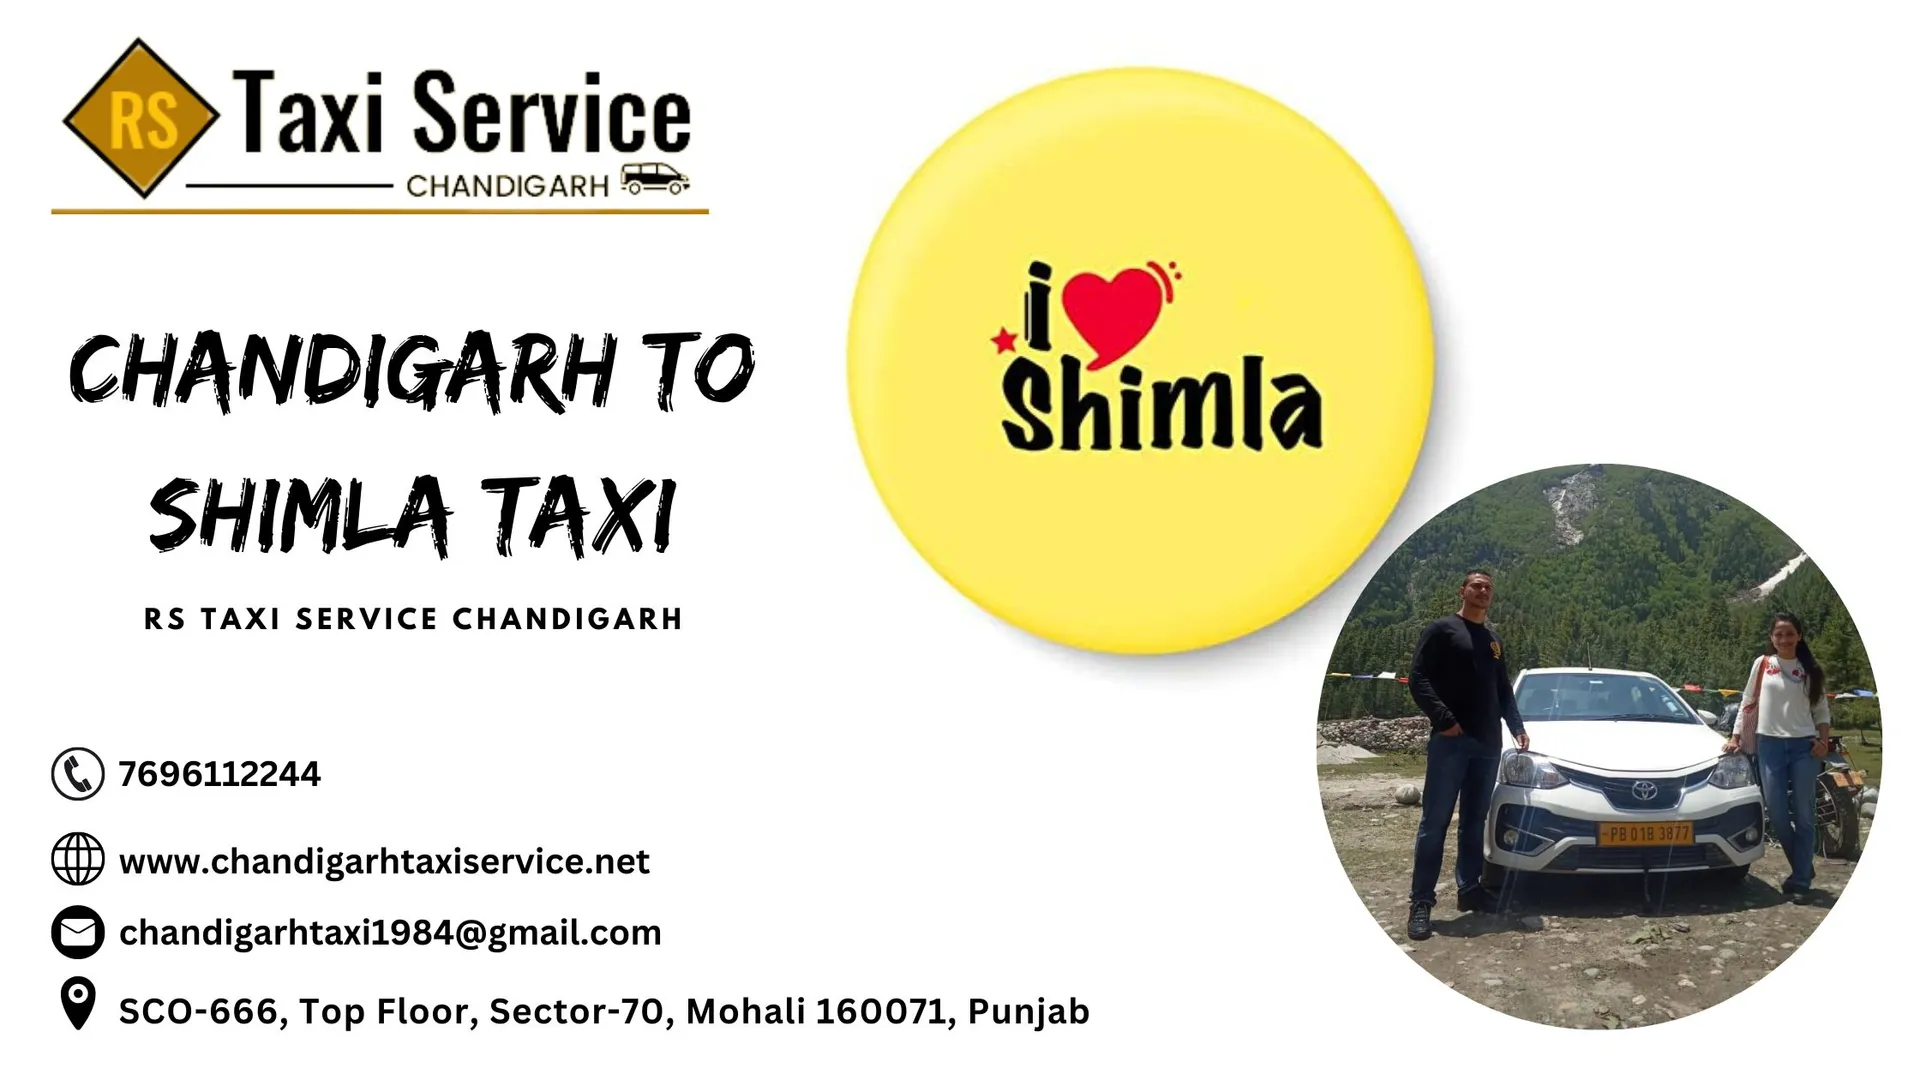 Whether it's a family vacation or a solo escape, our reliable taxi service guarantees a memorable trip. Punctuality is our commitment, ensuring you reach the charming hill station on time. Choose RS Taxi Service for an enchanting travel experience from Chandigarh to Shimla. 

Book your taxi today and embark on a scenic journey filled with awe-inspiring vistas and unforgettable memories. https://www.chandigarhtaxiservice.net/chandigarh-to-shimla-taxi-service

Contact Person Name:- Ravi Salaria
Contact no. 7696112244
Address:- SCO-666, Top Floor, Sector-70, Mohali 160071, Punjab
Website:- https://www.chandigarhtaxiservice.net/
Email:- chandigarhtaxi1984@gmail.com